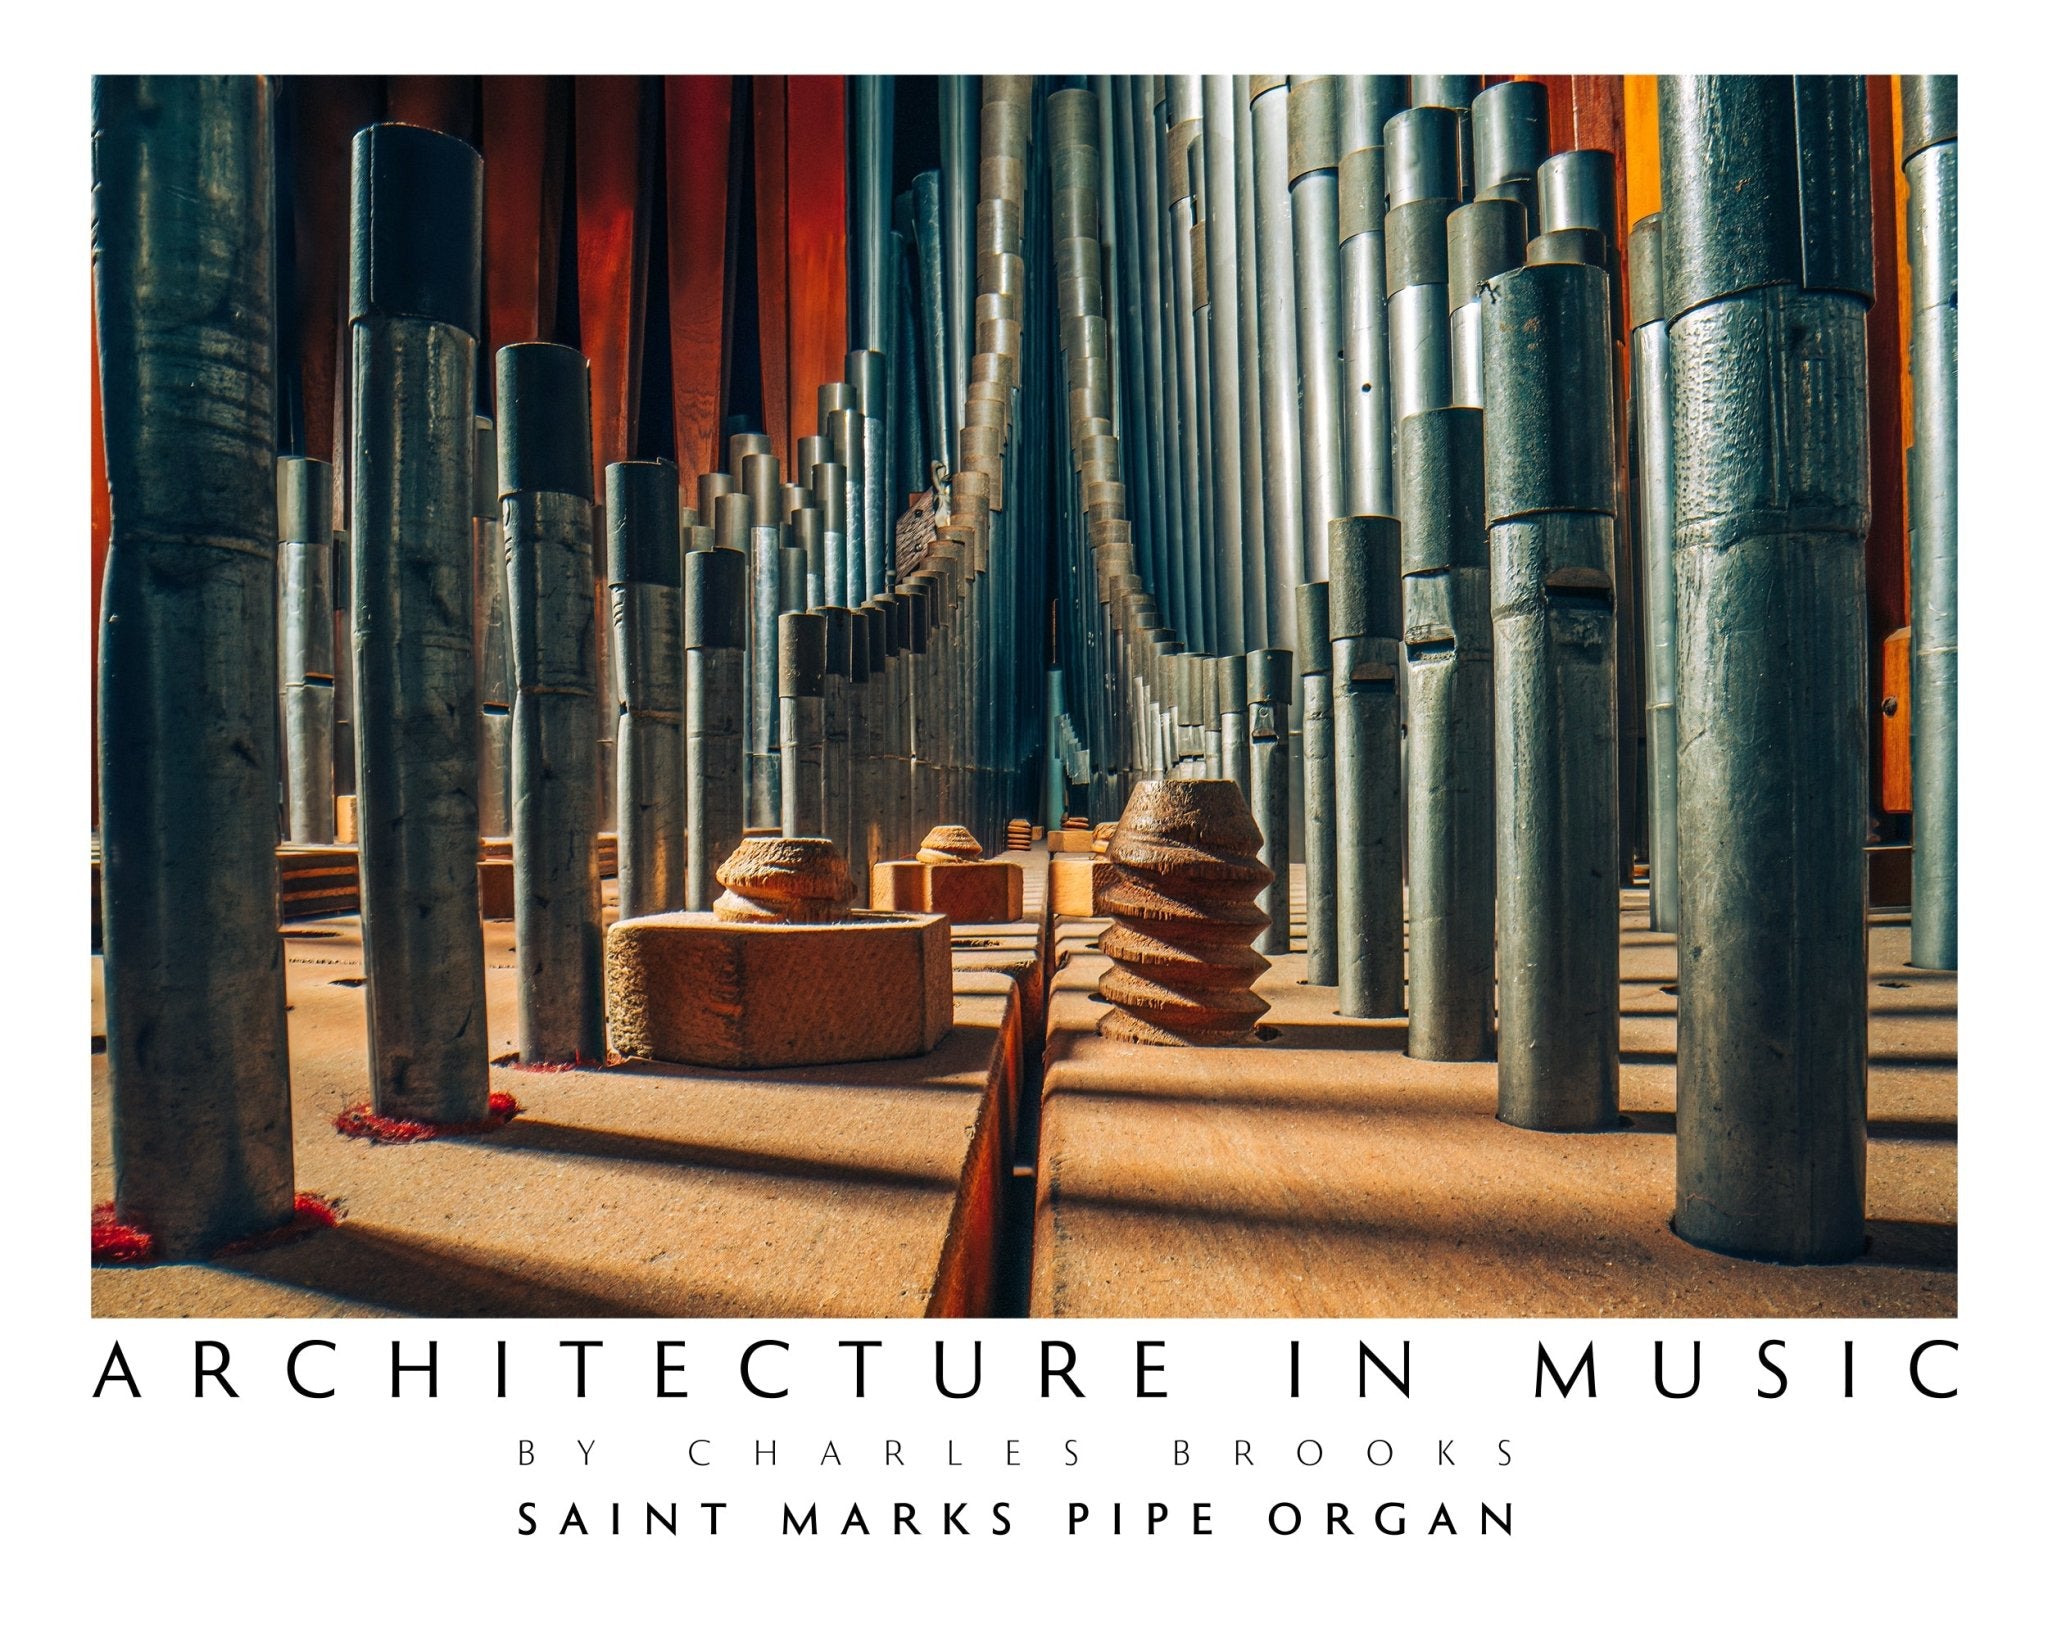 Photo of St Marks Pipe Organ, Part 2. High Quality Poster. - Giclée Poster Print - Architecture In Music